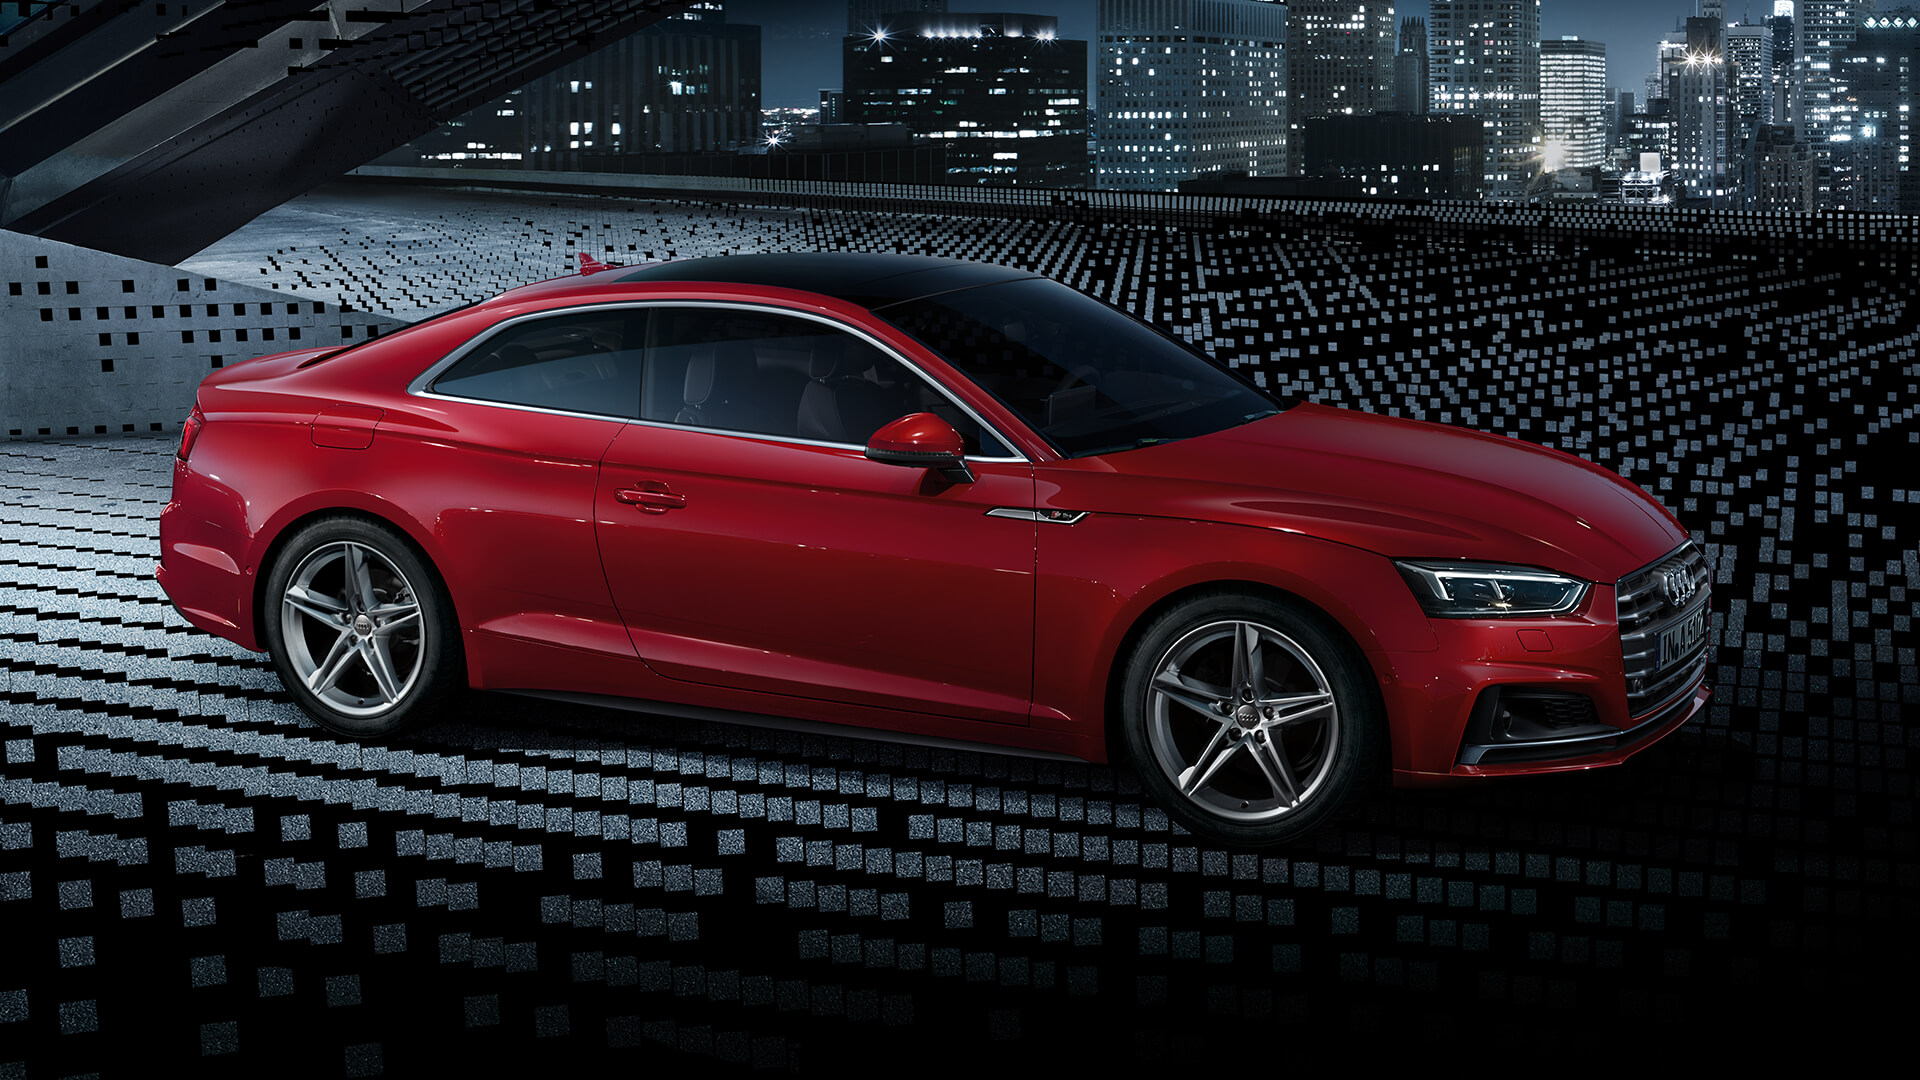 Audi A5 Backgrounds on Wallpapers Vista